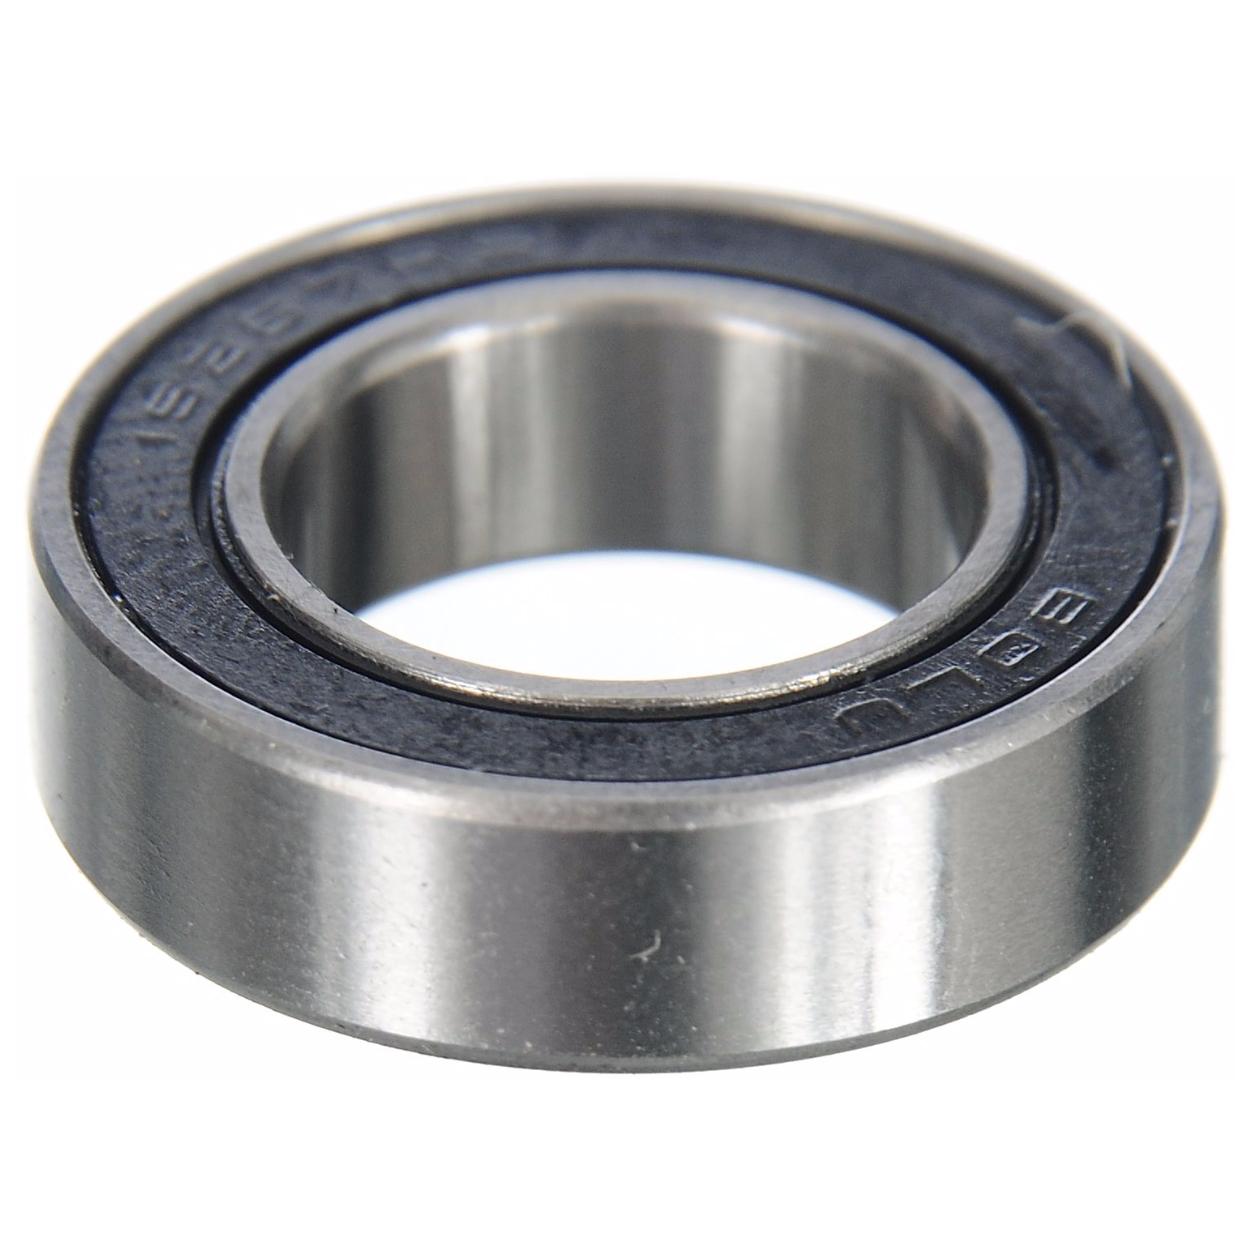 Brand-x Sealed Bearing (mr 15267 2rs)  Silver